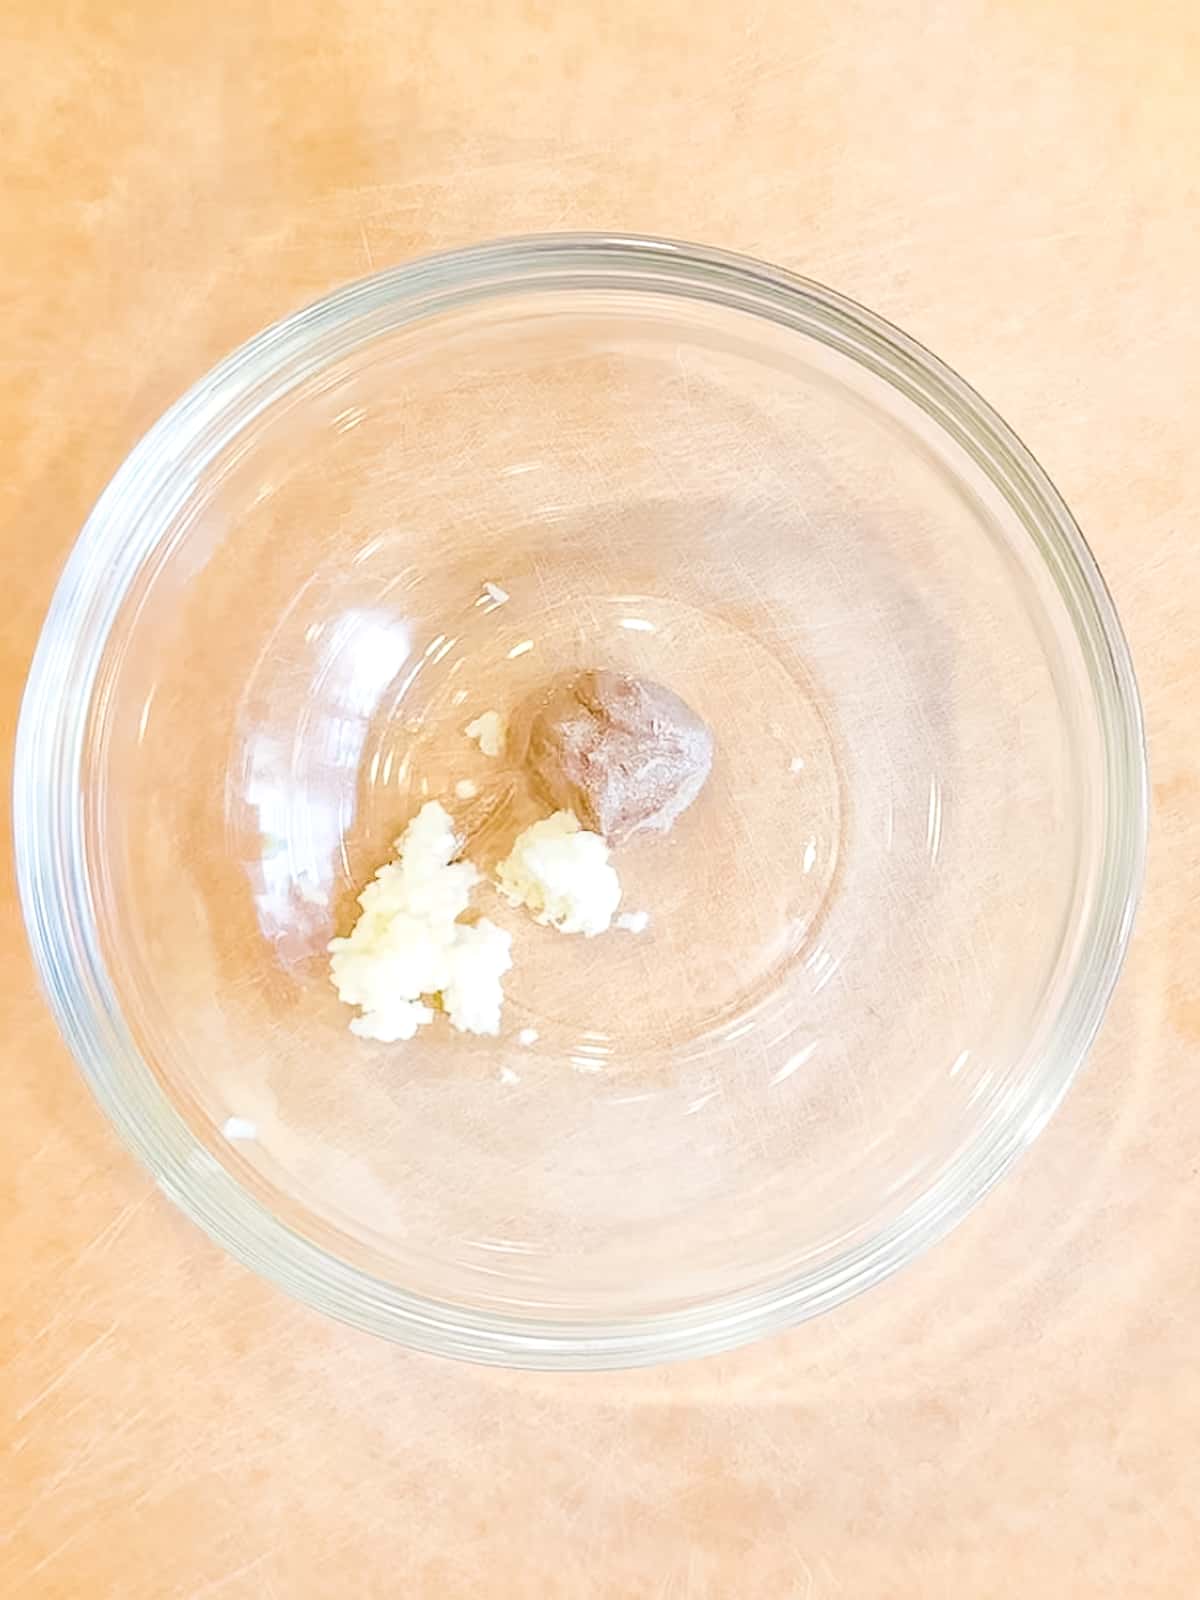 Anchovy paste and grated garlic in a glass bowl.